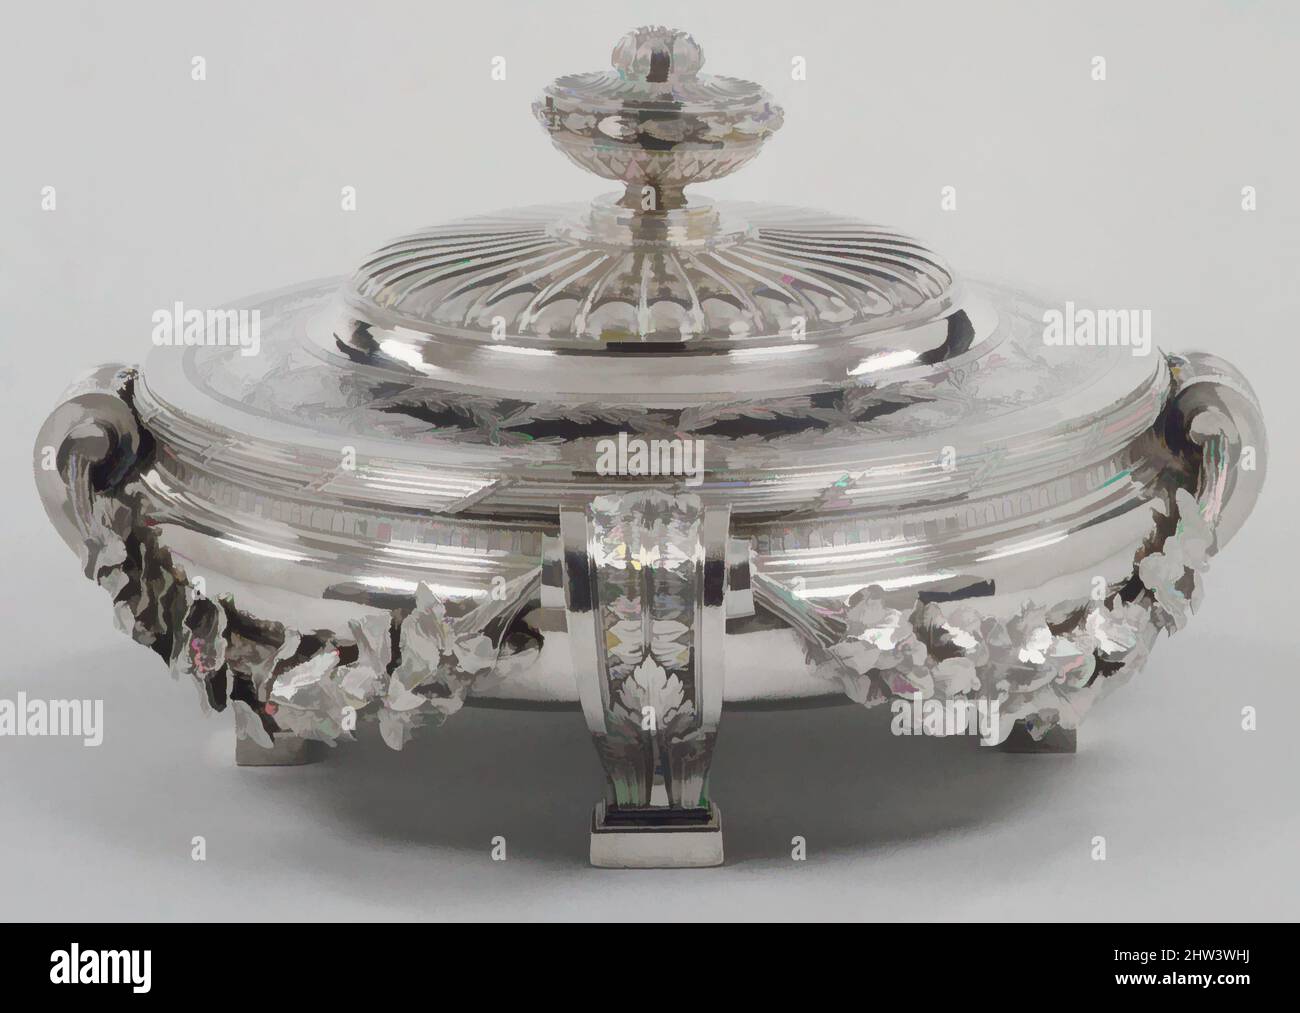 Art inspired by Dish with cover and liner, Jacques-Nicolas Roettiers (1736–1788, master 1765, retired 1777), 1775–76, French, Paris, Silver, H. with cover 7-5/16 in. (18.6 cm.); Gr. W. 12-1/2 in. (31.8 cm.); Diam. of liner 10 in. (25.4 cm.), Metalwork-Silver, Jacques-Nicolas Roettiers, Classic works modernized by Artotop with a splash of modernity. Shapes, color and value, eye-catching visual impact on art. Emotions through freedom of artworks in a contemporary way. A timeless message pursuing a wildly creative new direction. Artists turning to the digital medium and creating the Artotop NFT Stock Photo